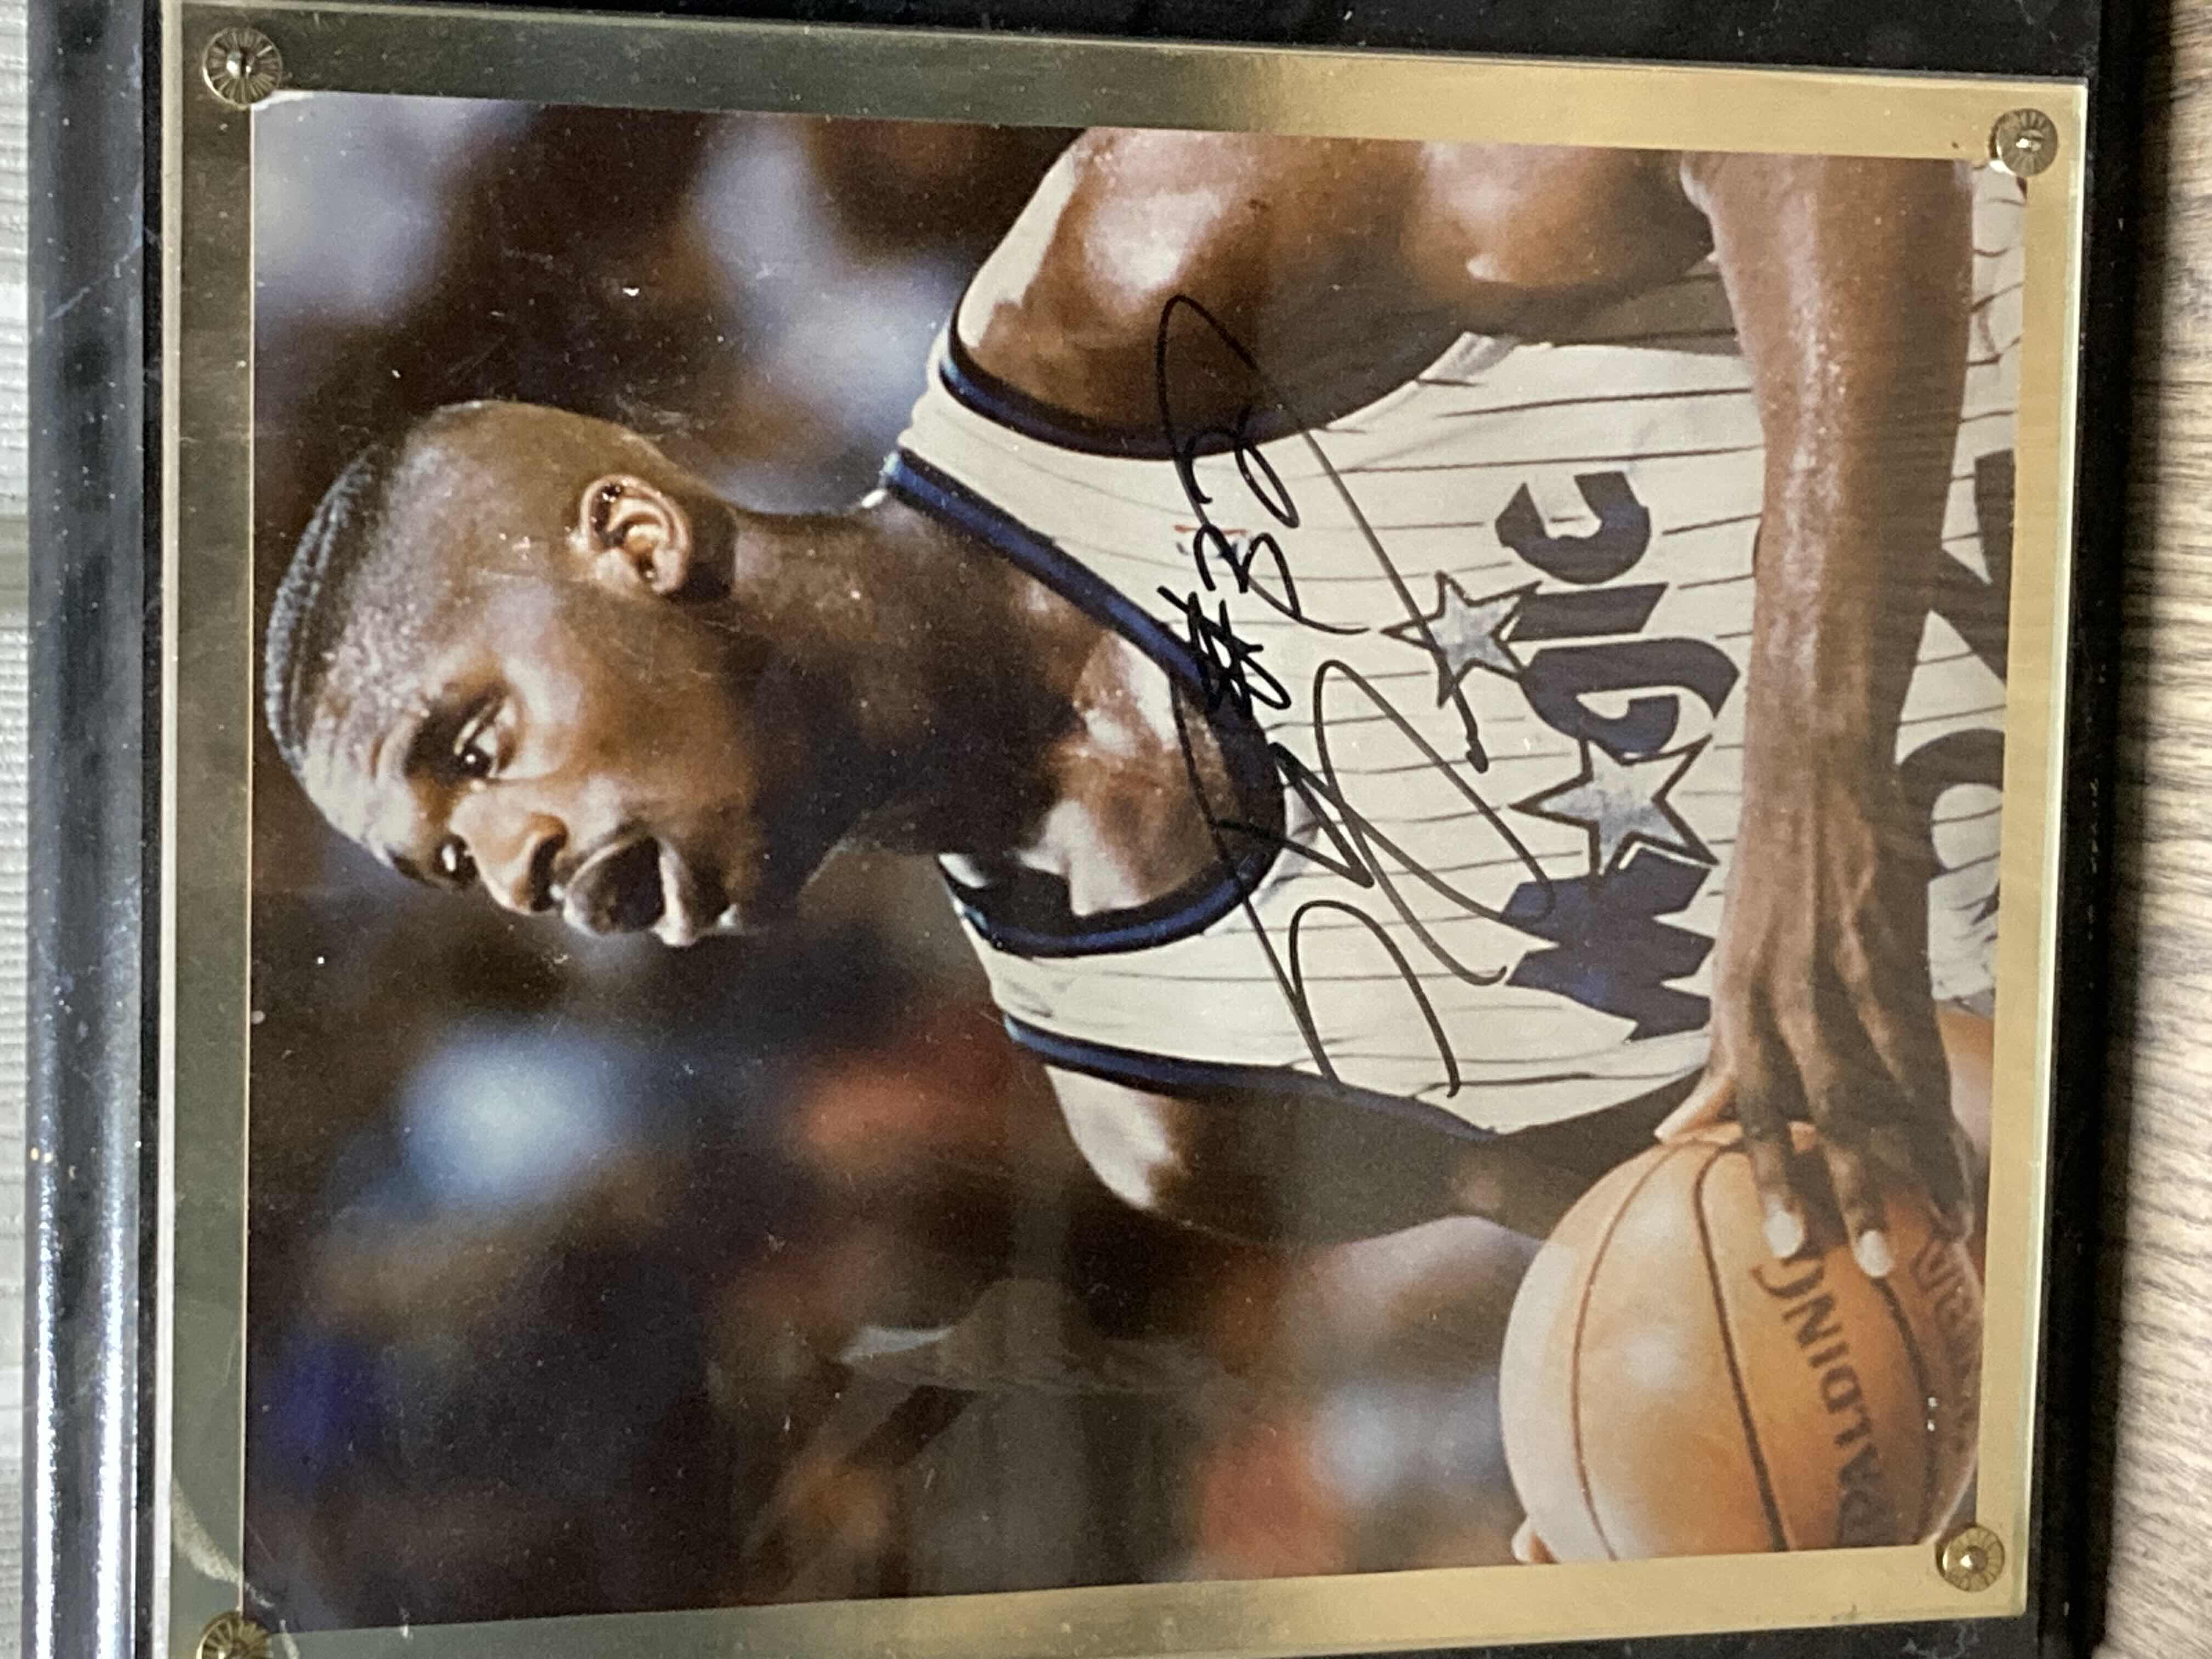 Photo 2 of SHAQUILLE O’NEAL MAGIC #32 MEMORABILIA PLAQUE AUTOGRAPHED BY SHAQUILLE O’NEAL W PLAYERS CARDS & COA 15” X 12”